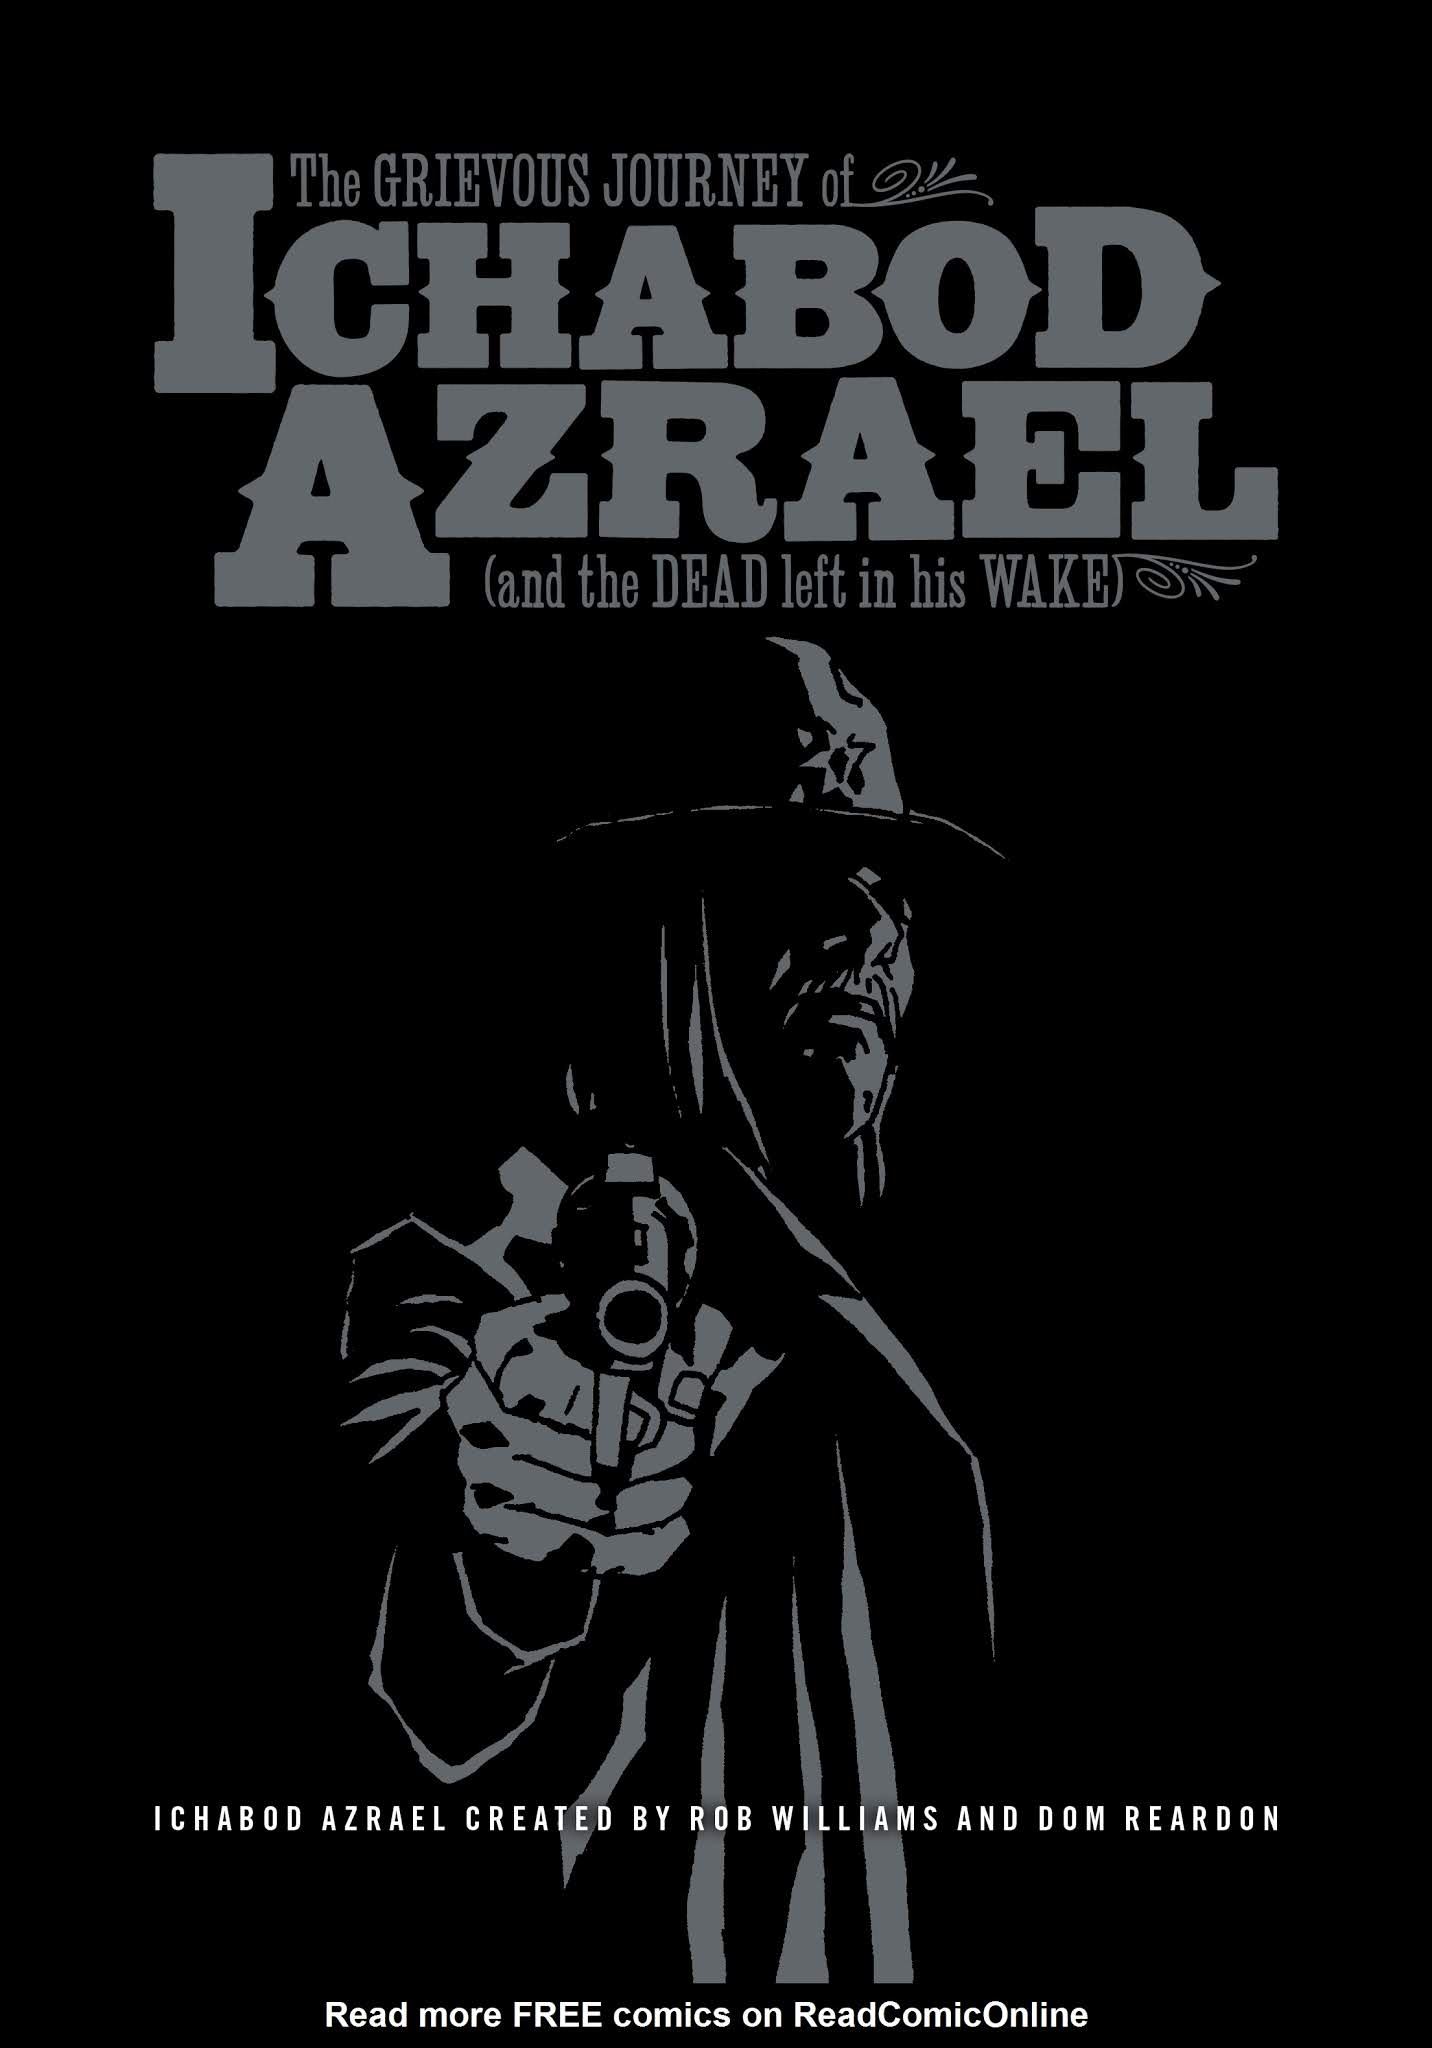 Read online The Grievous Journey of Ichabod Azrael (and the DEAD LEFT in His WAKE) comic -  Issue # TPB - 3